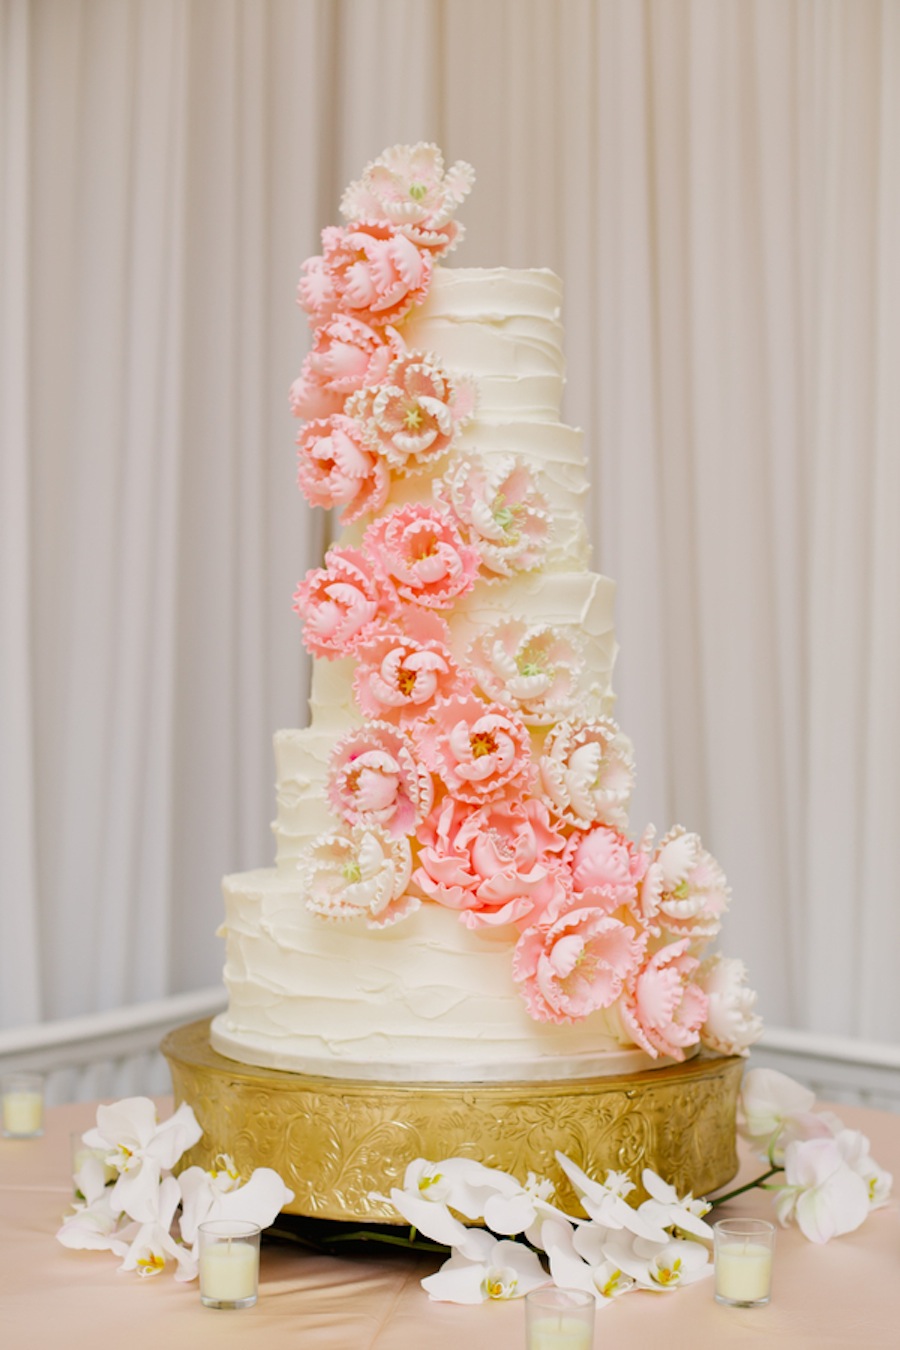 5-Tier Round White Wedding Cake with Cascade of Pink Flowers